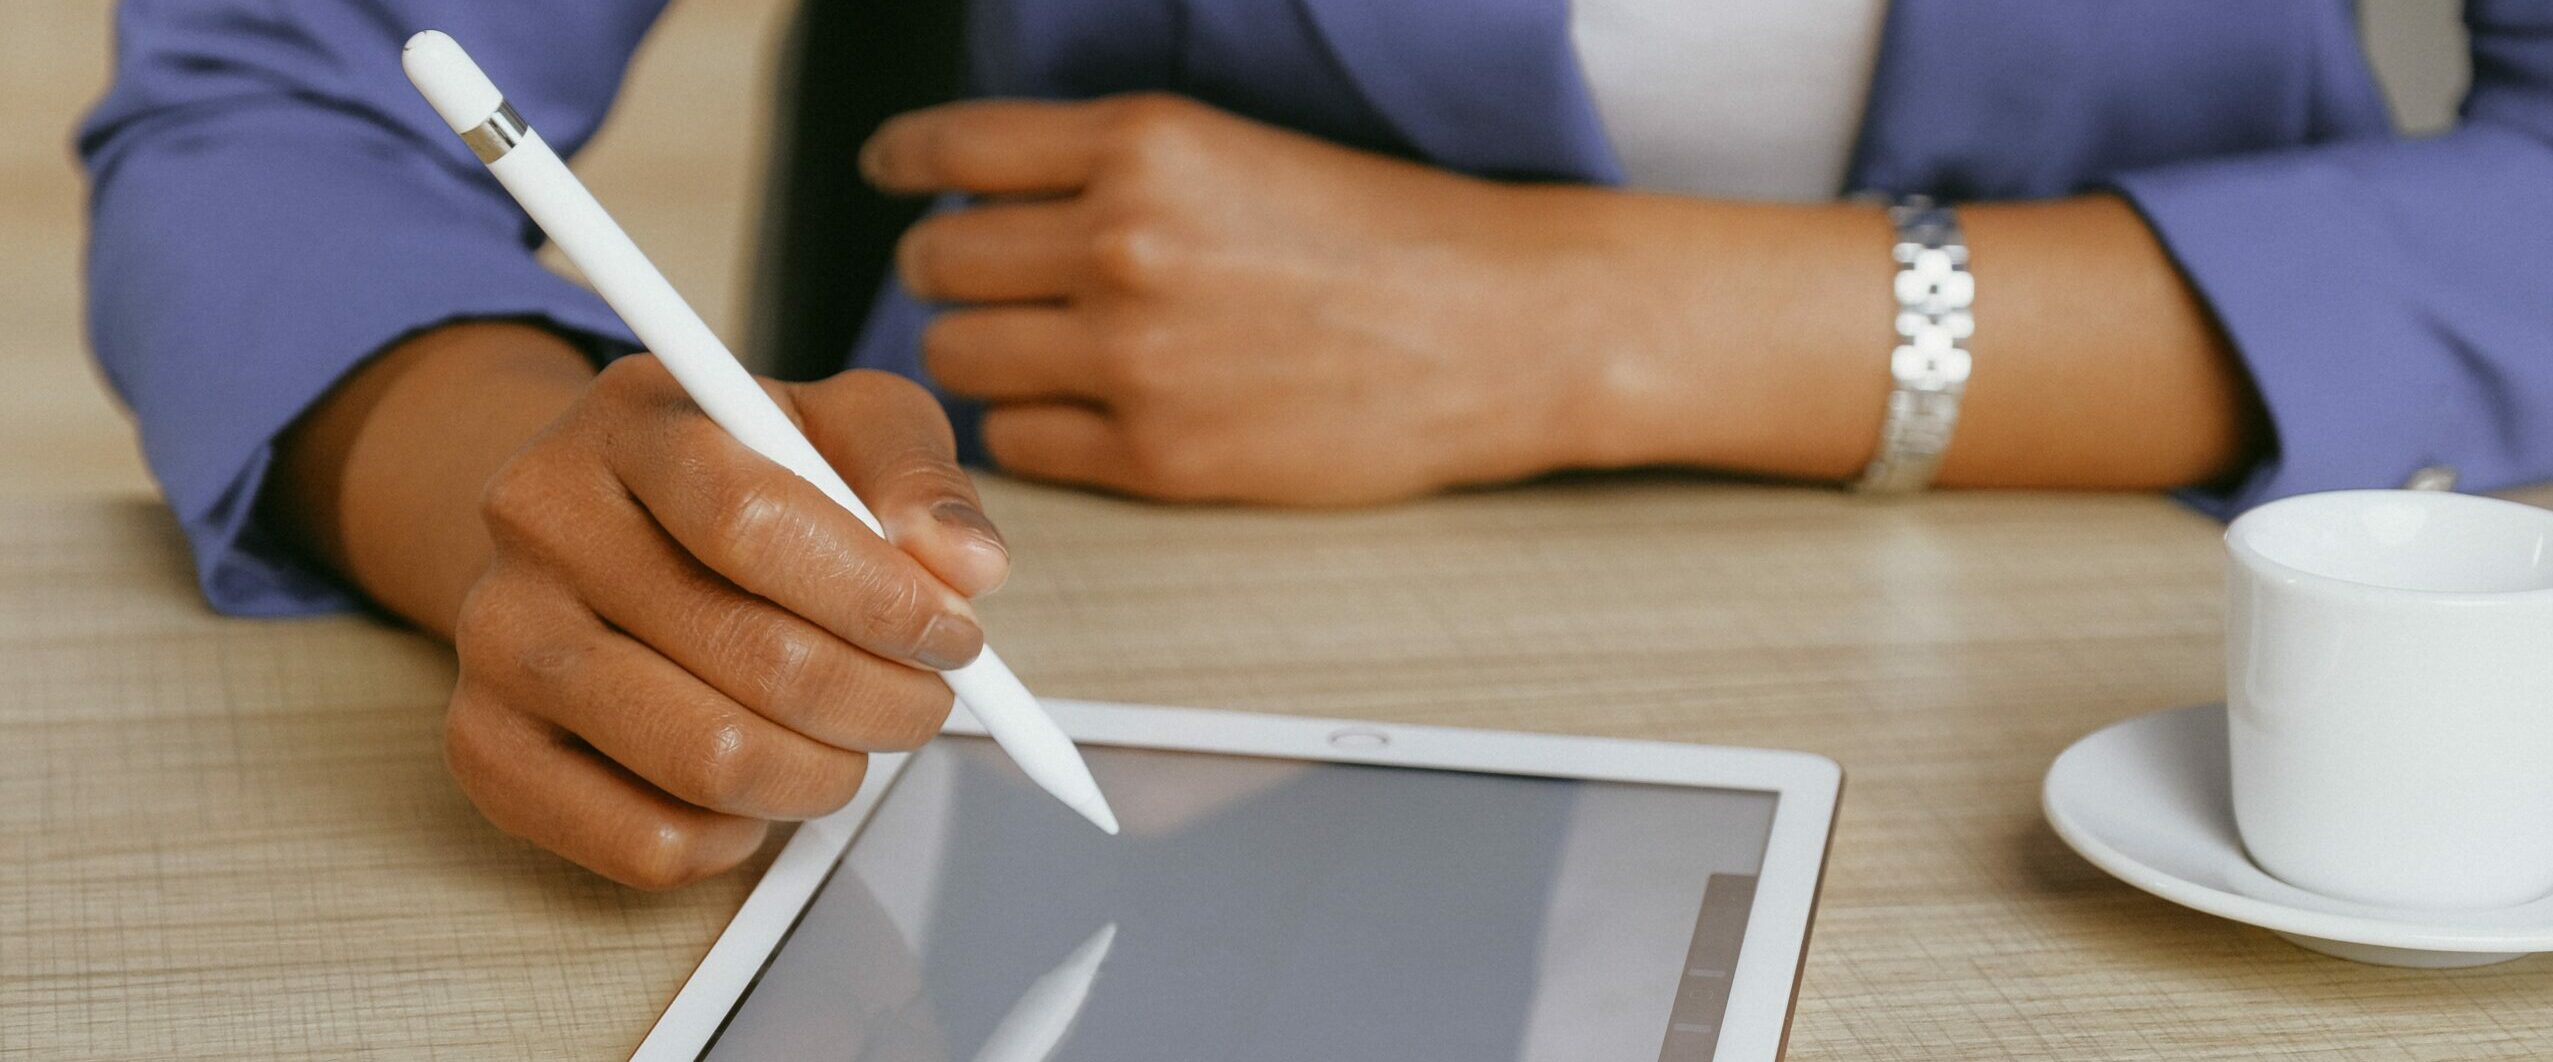 Black woman's hands using stylus on tablet